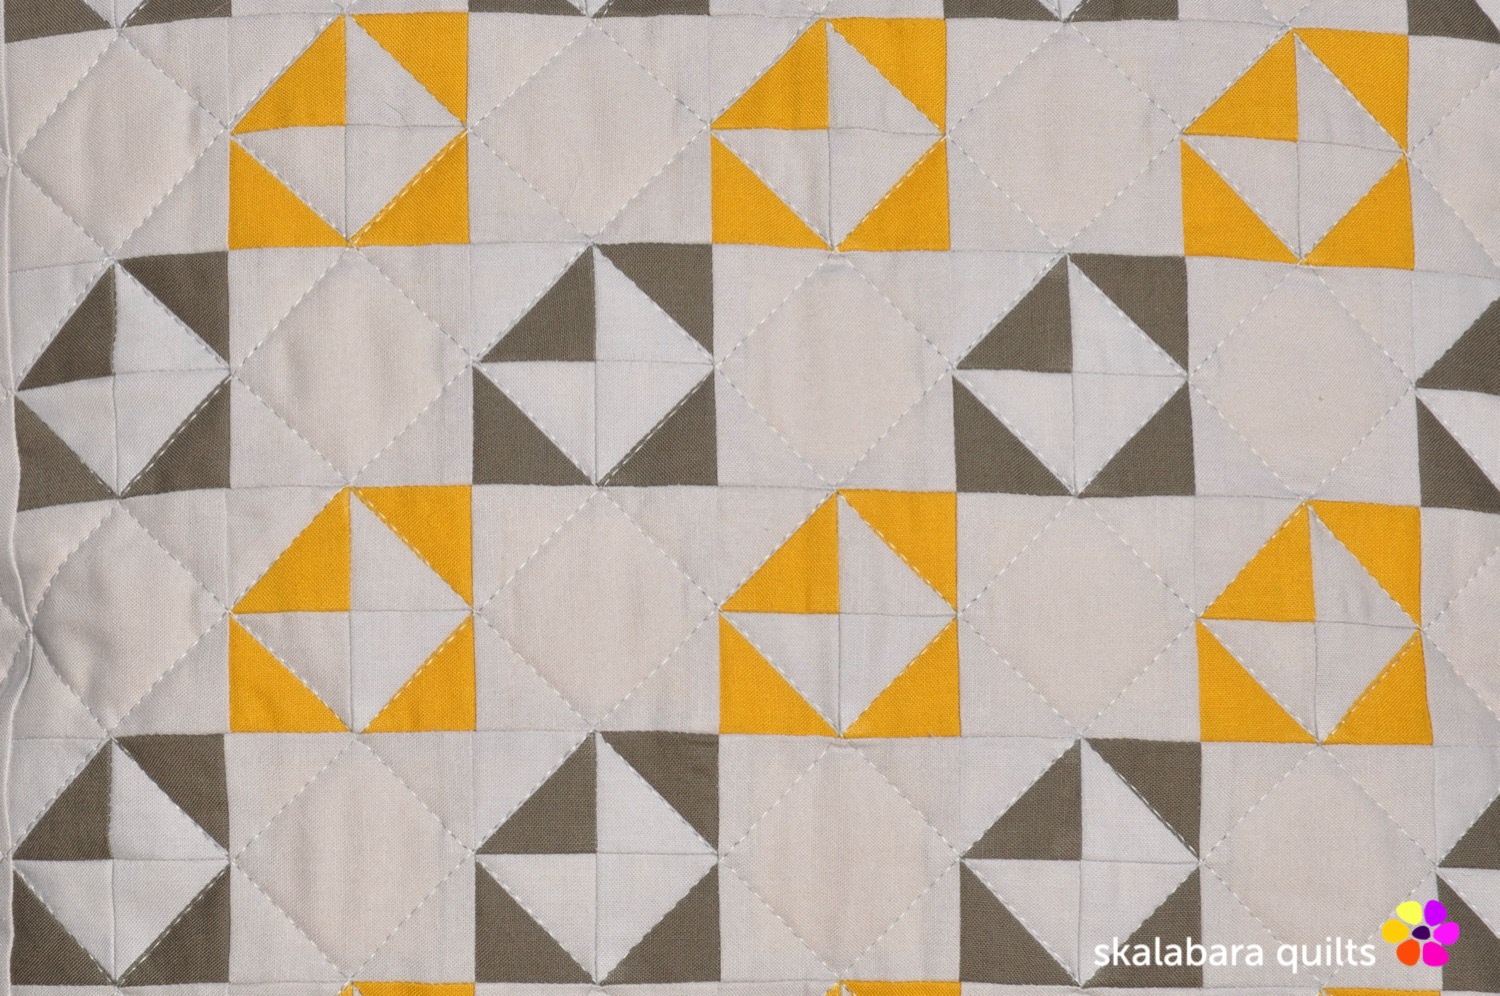 matching cushion covers to atmosphere quilt - skalabara quilts